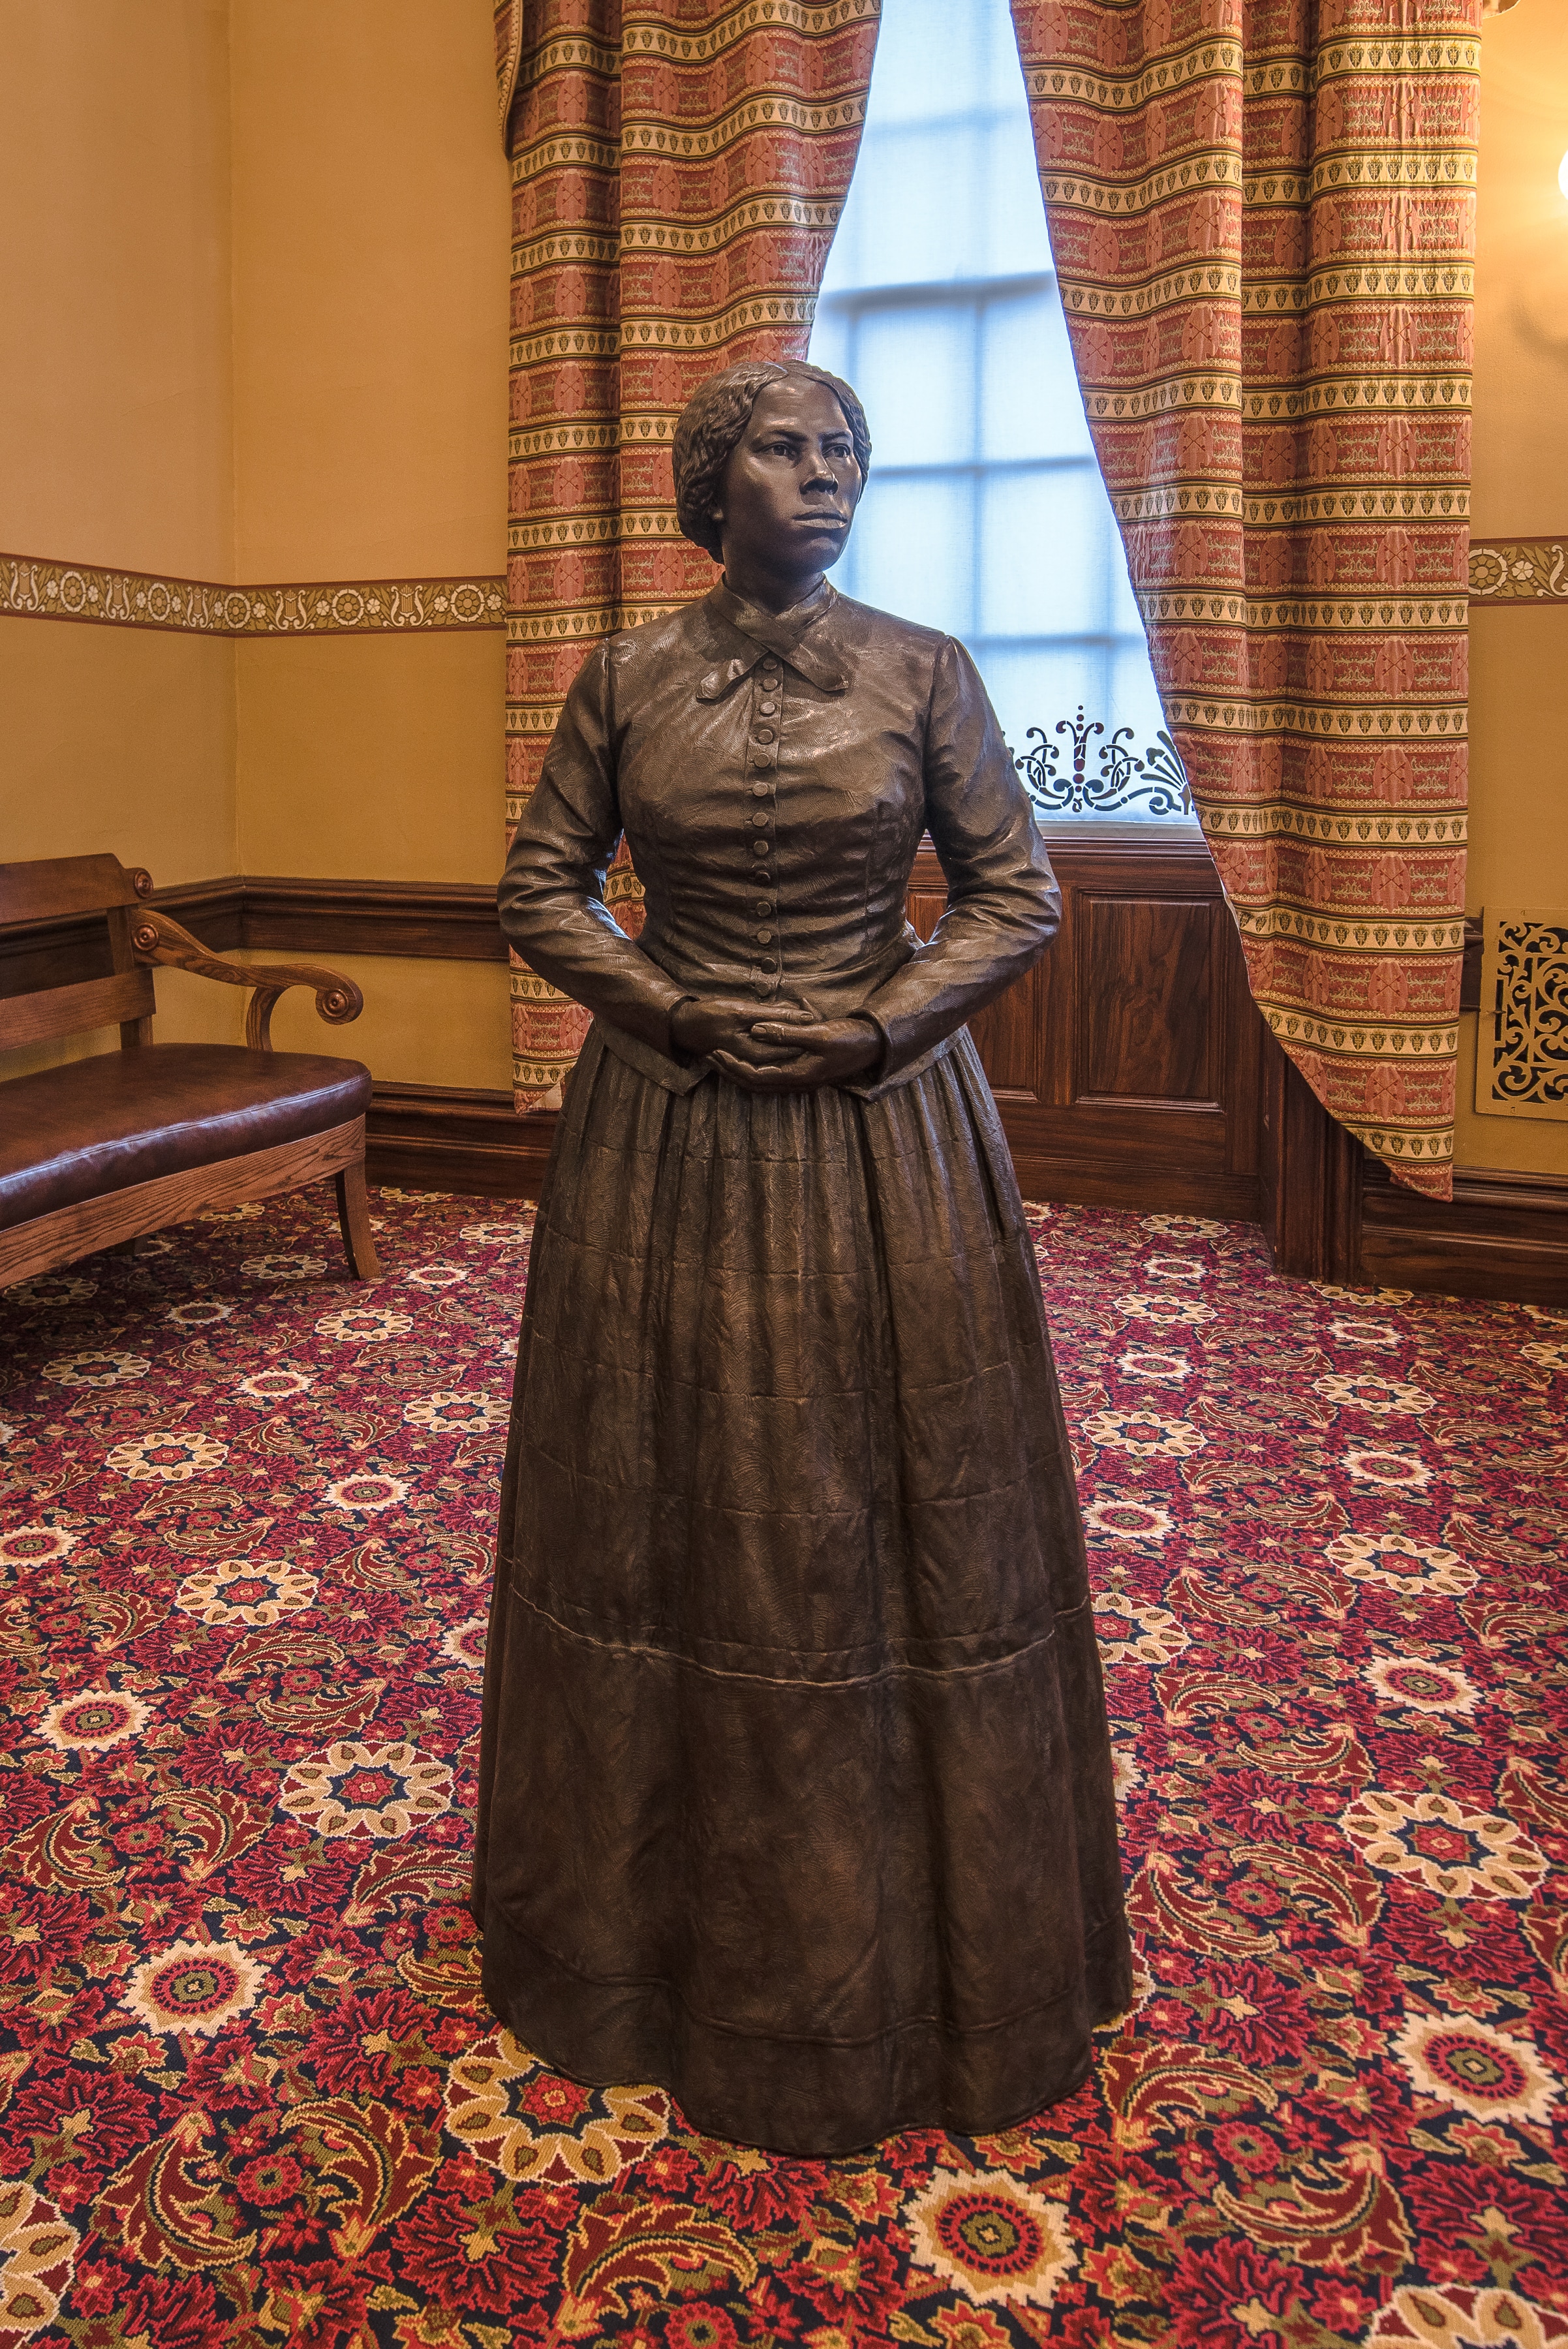 Harriet Tubman at MD State House credit Maryland State Archives